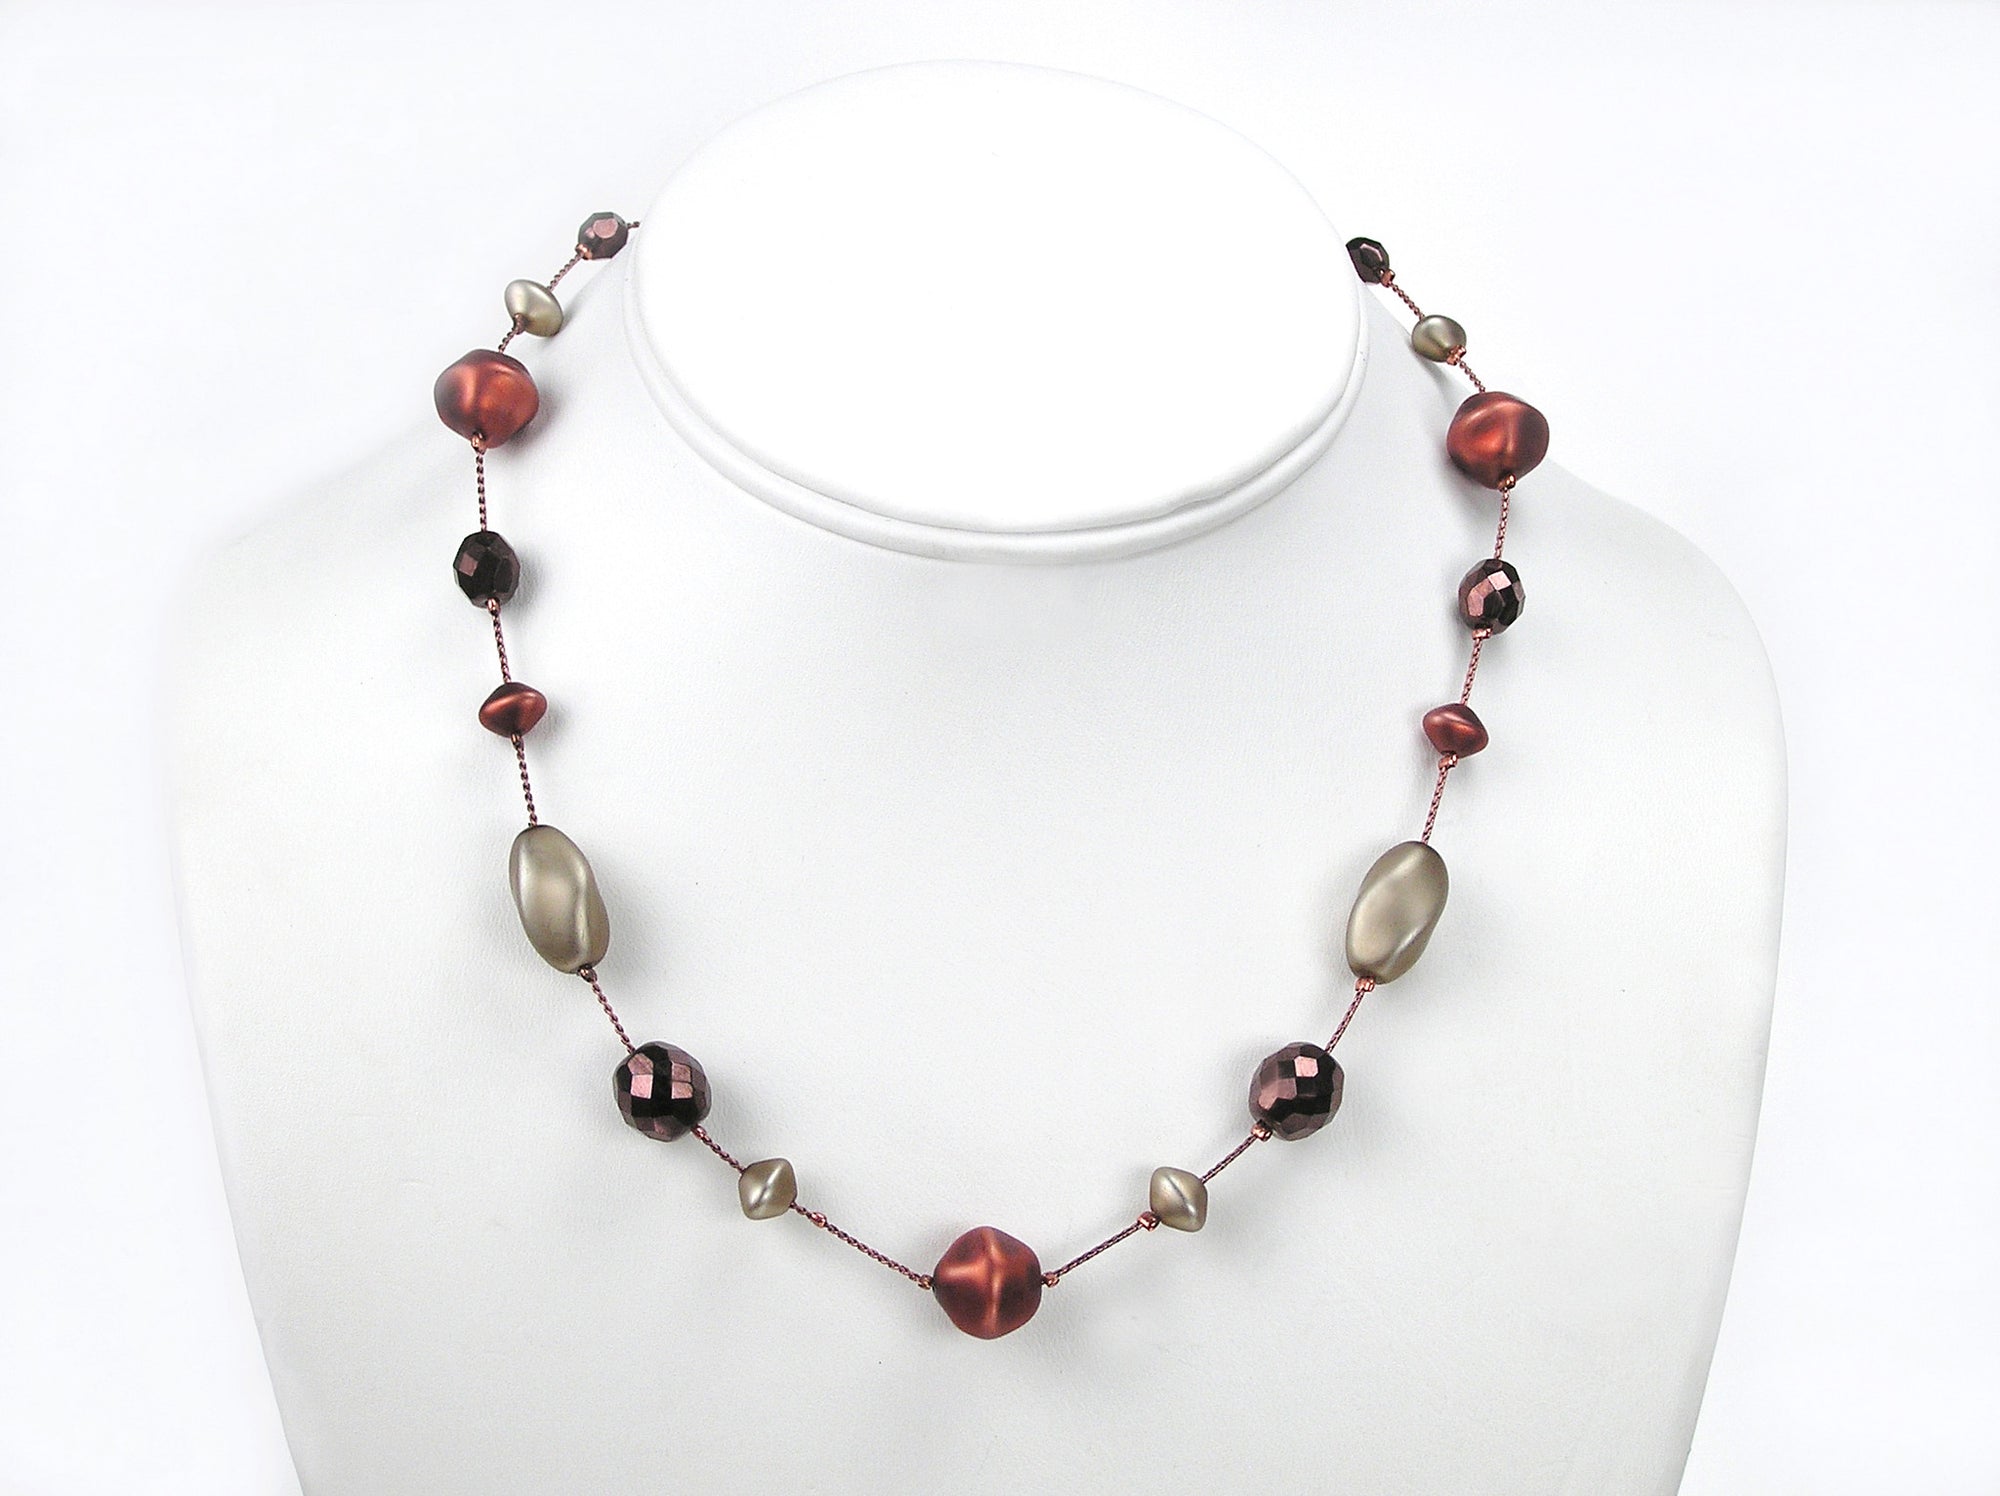 16 Inch Handmade Czech Glass Matted Pearl Illusion Copper Metallic Necklace